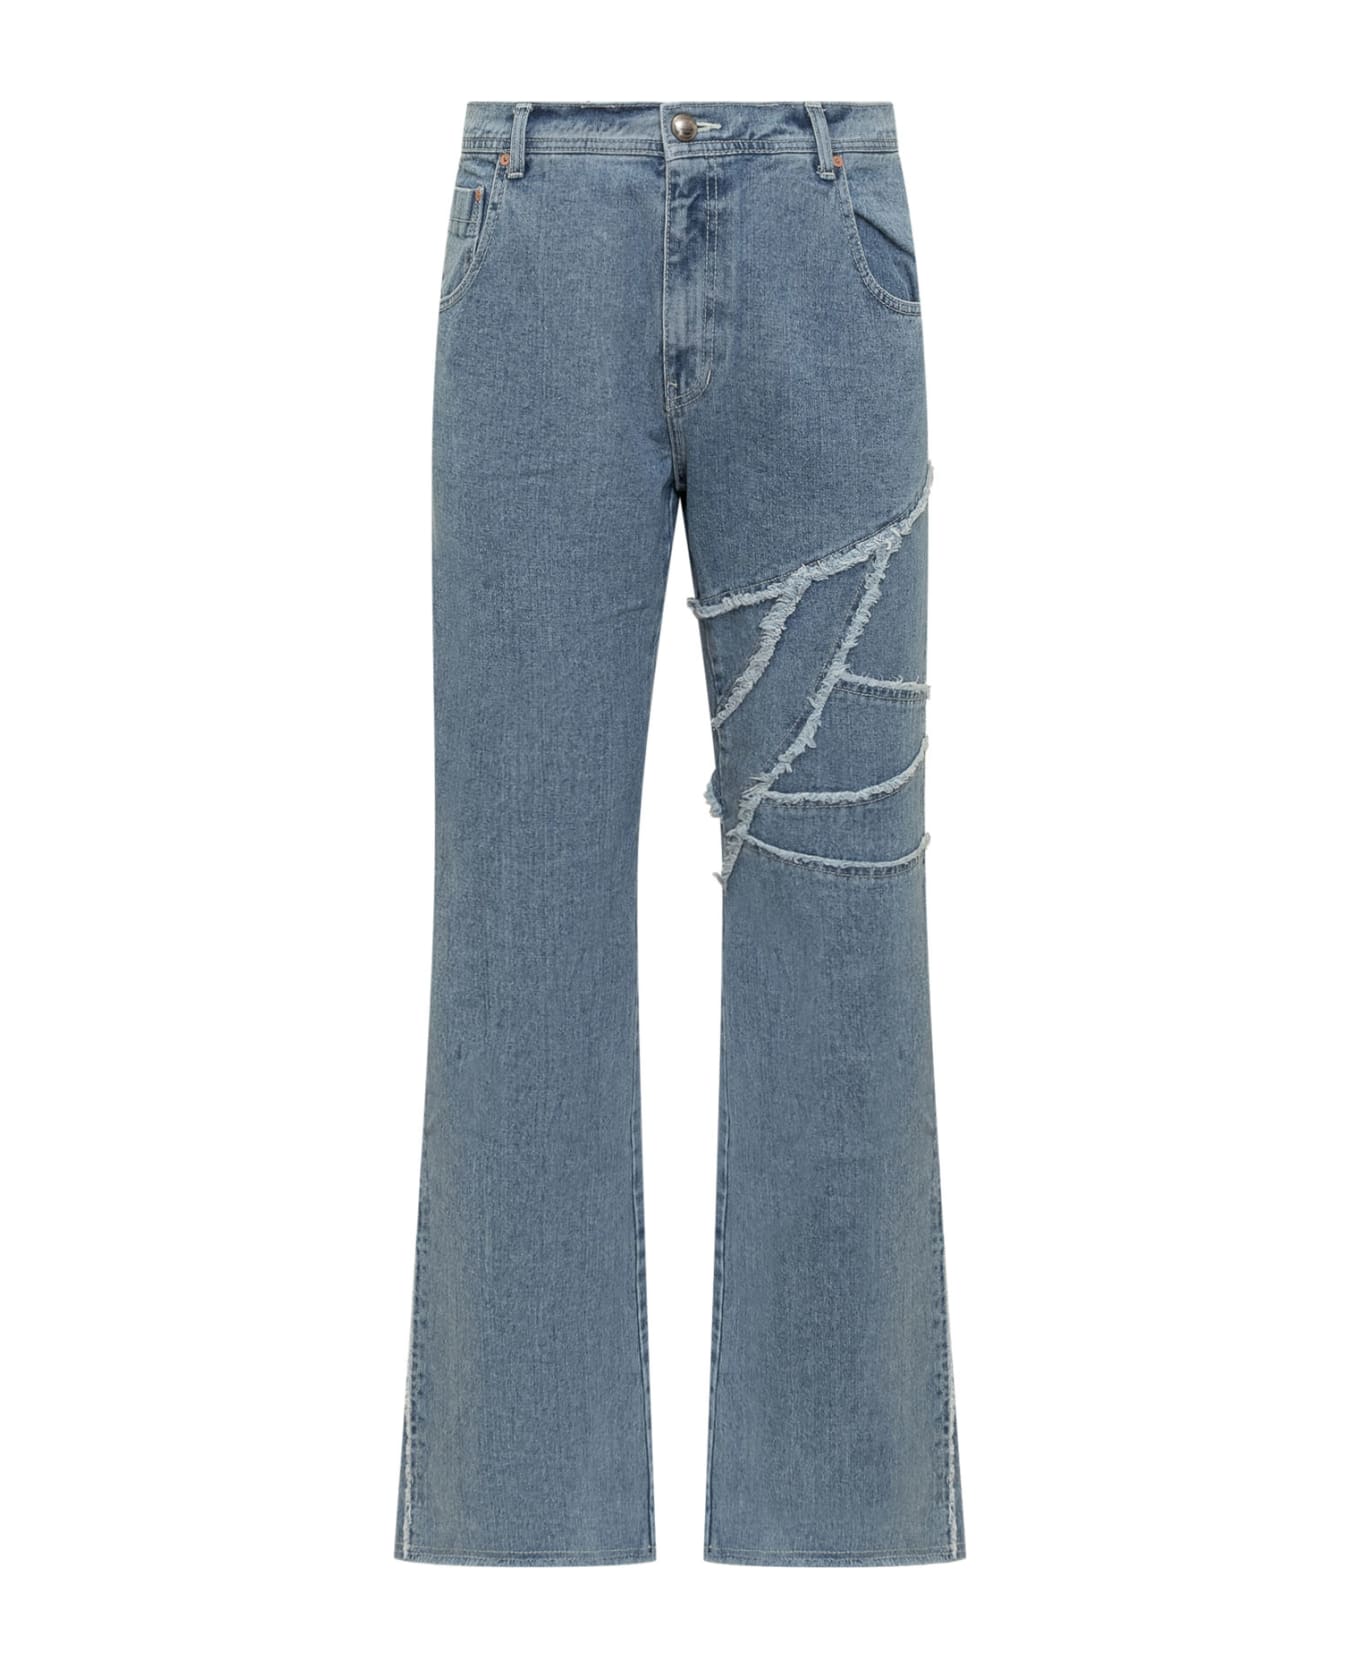 Andersson Bell Ghentel Jeans - WASBLU デニム